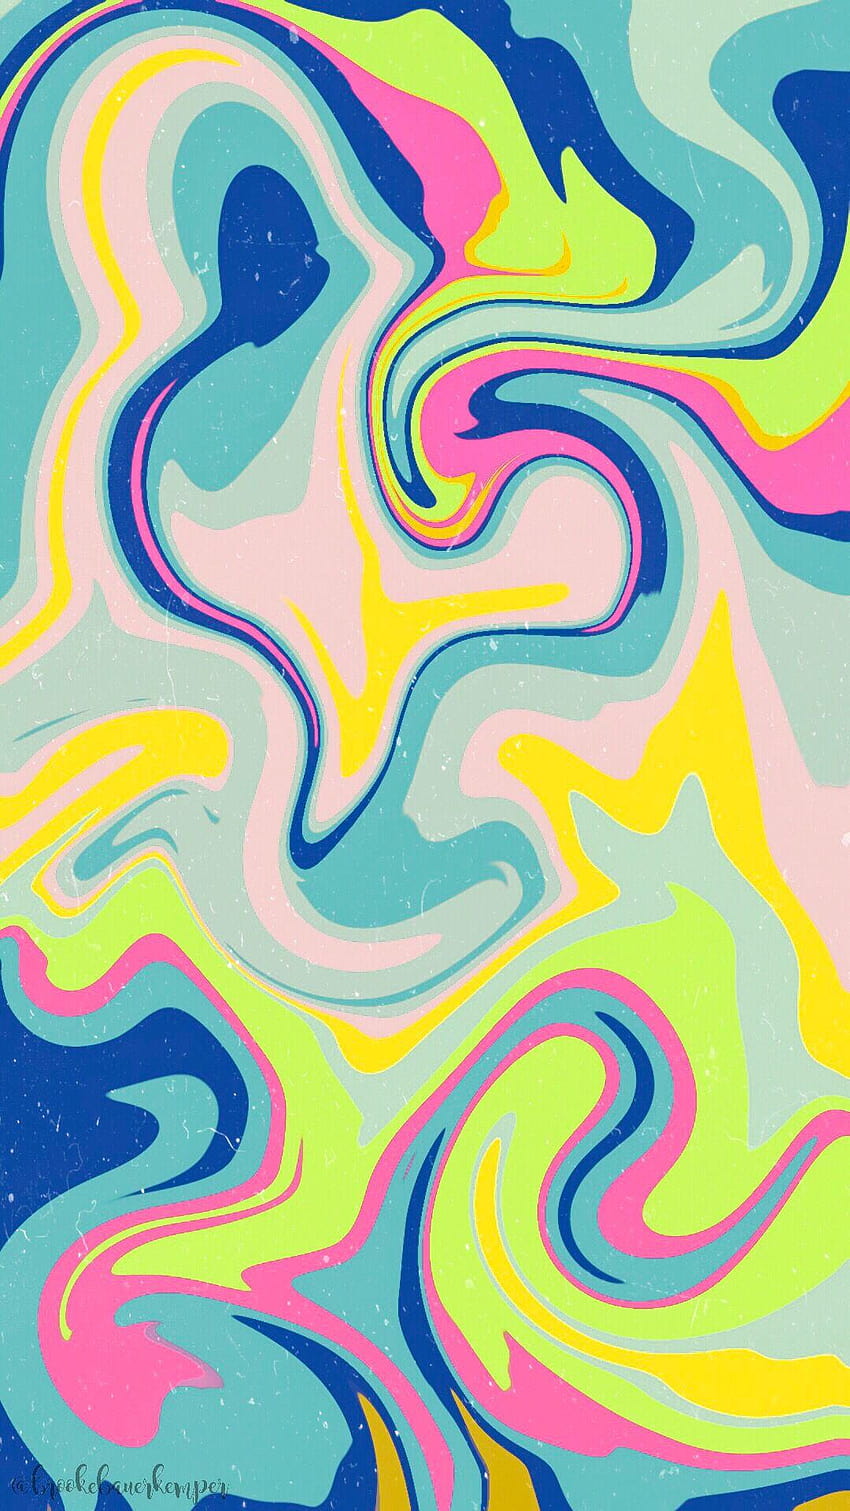 Psychedelic iPhone in 2019, trippy vsco HD phone wallpaper